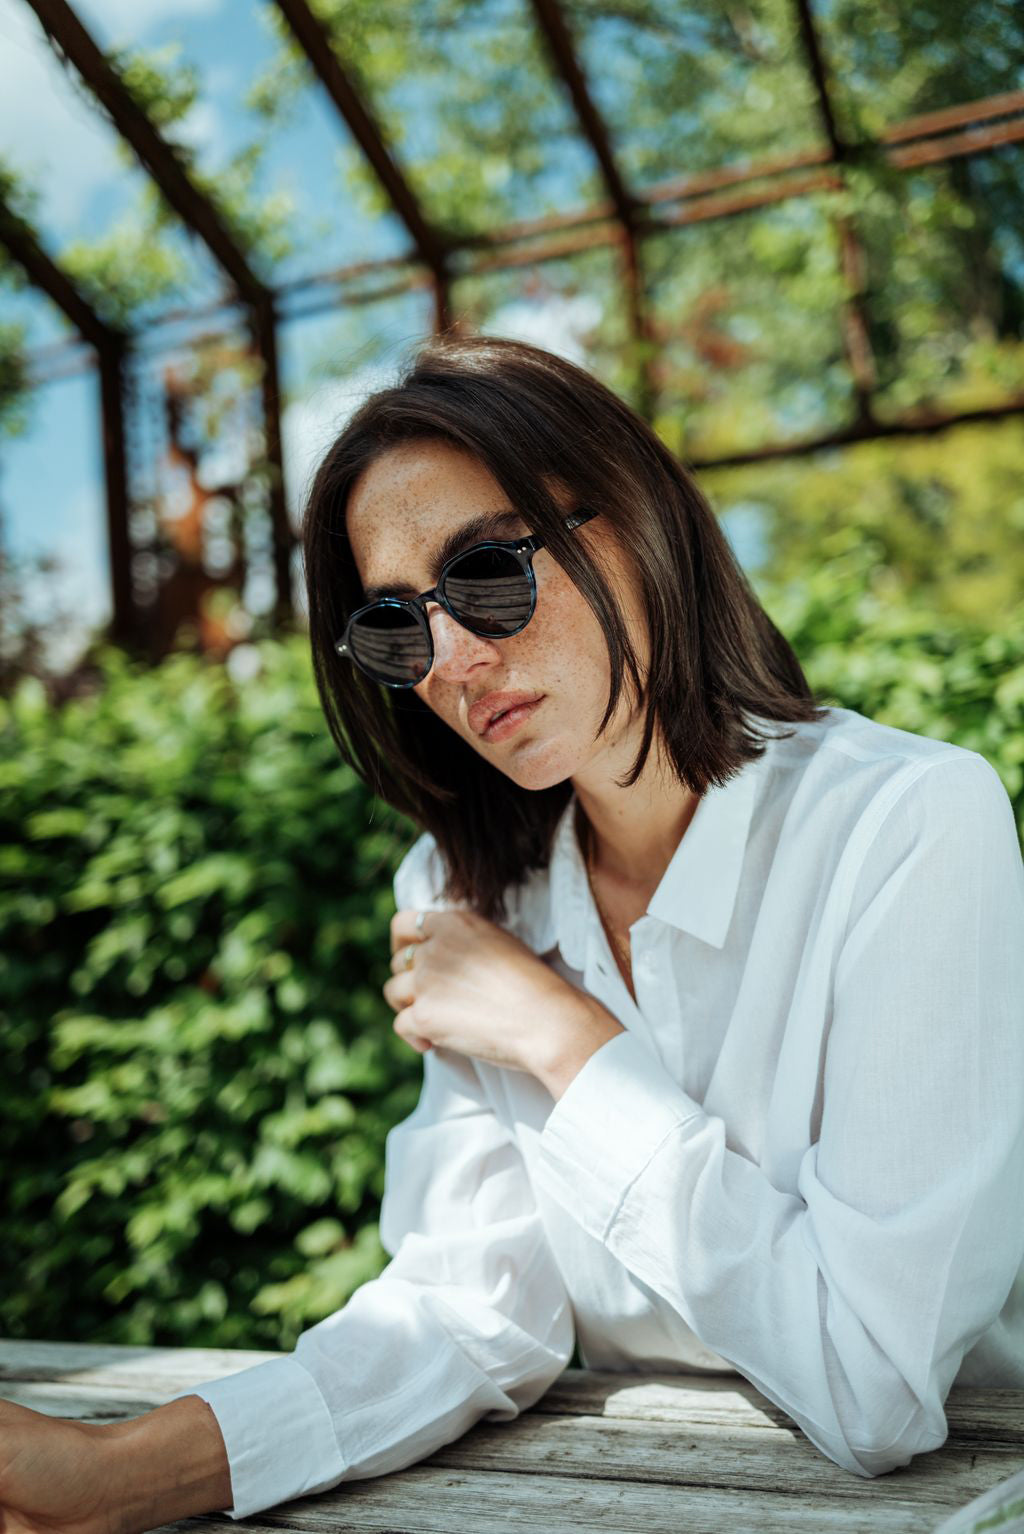 Woman with black sunglasses and white blouse, sitting at a wooden table outdoors, street style